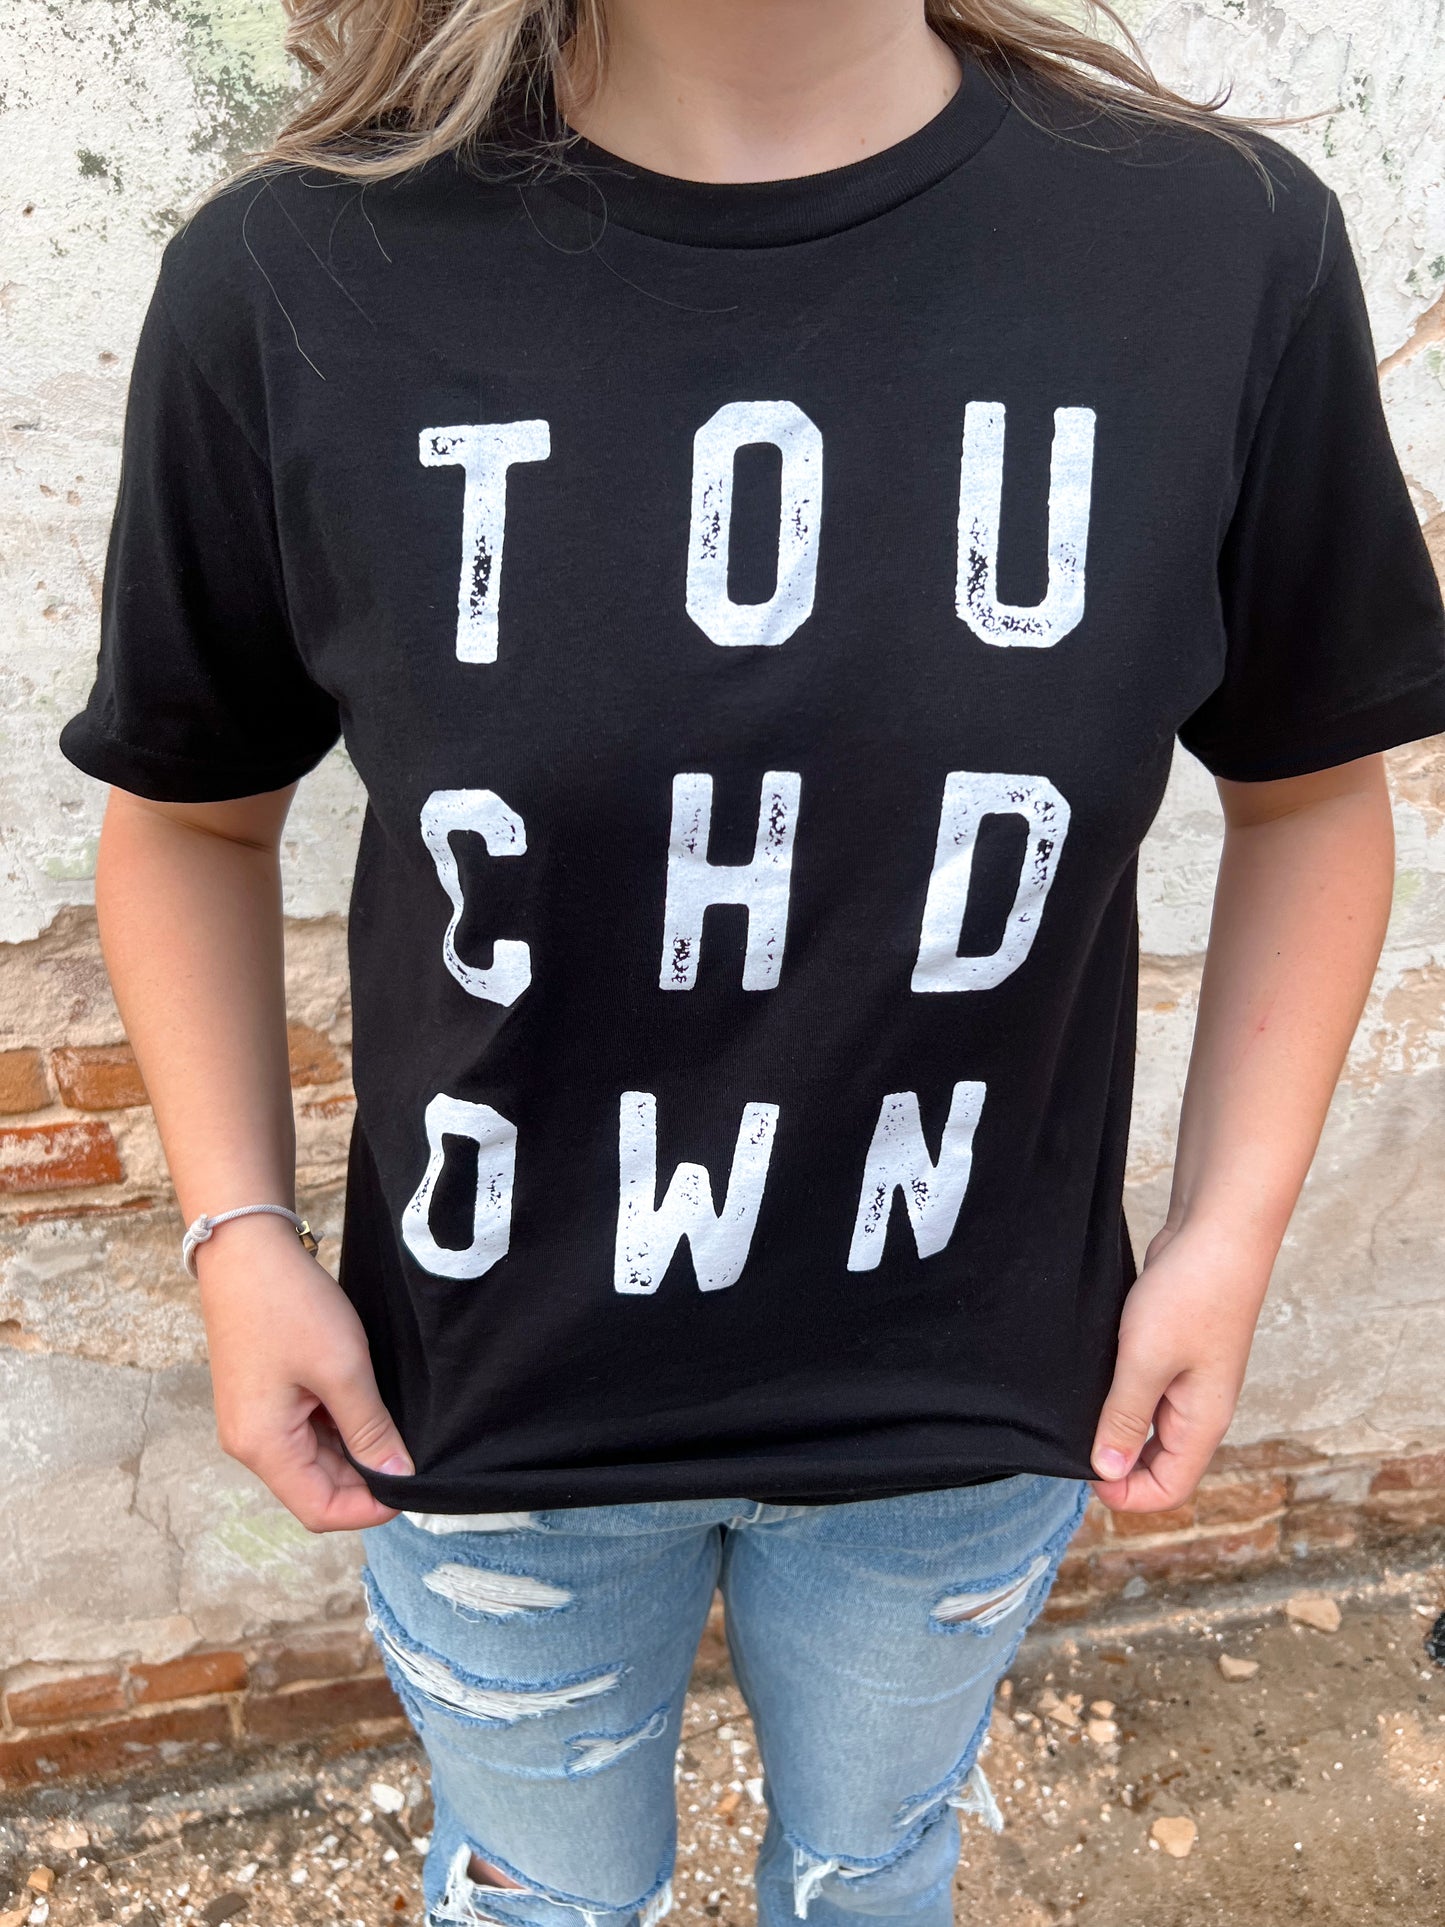 Touchdown Graphic Tee-Graphic T-Shirt-The Twisted Chandelier-8/8/23, Bin a6-The Twisted Chandelier